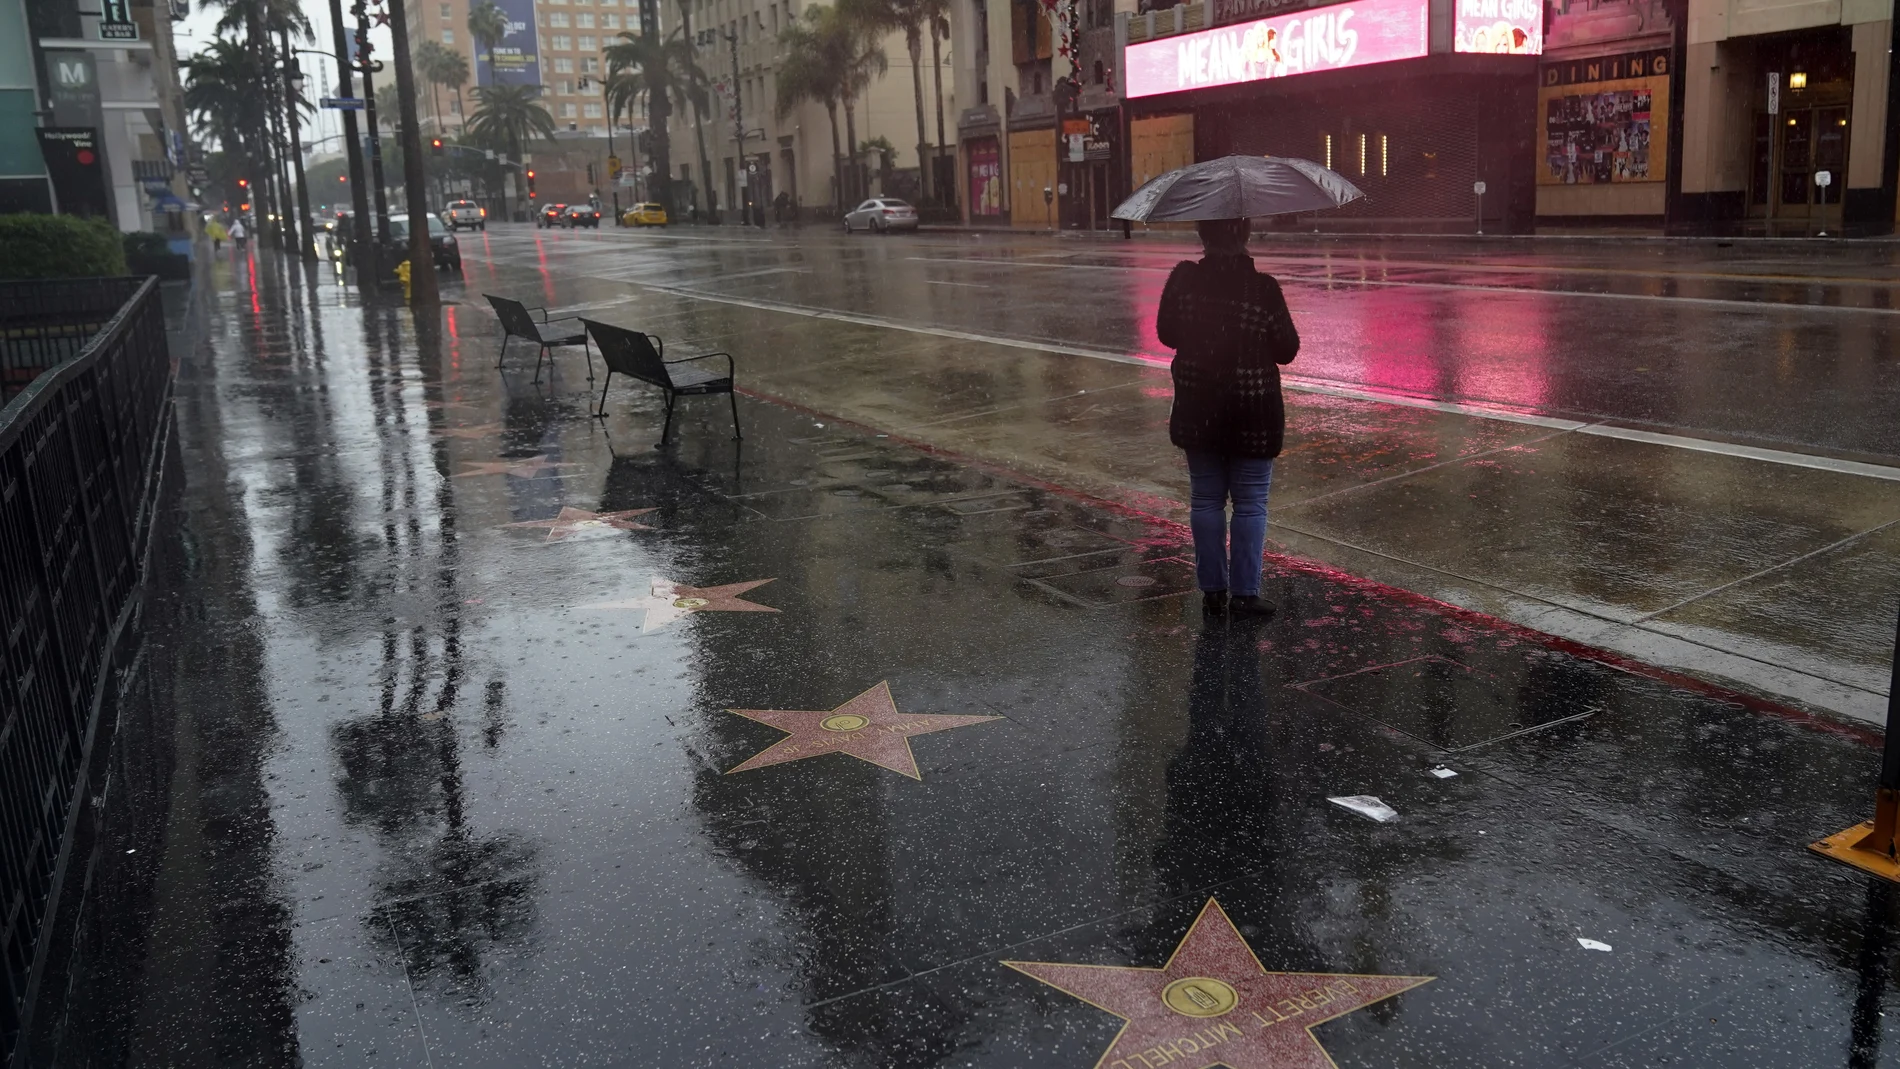 A woman waits at a bus stop in the rain Monday, Dec. 28, 2020, in the Hollywood section of Los Angeles. Rain, hail and snow fell Monday as Southern California saw its first significant storm of the season. (AP Photo/Marcio Jose Sanchez)